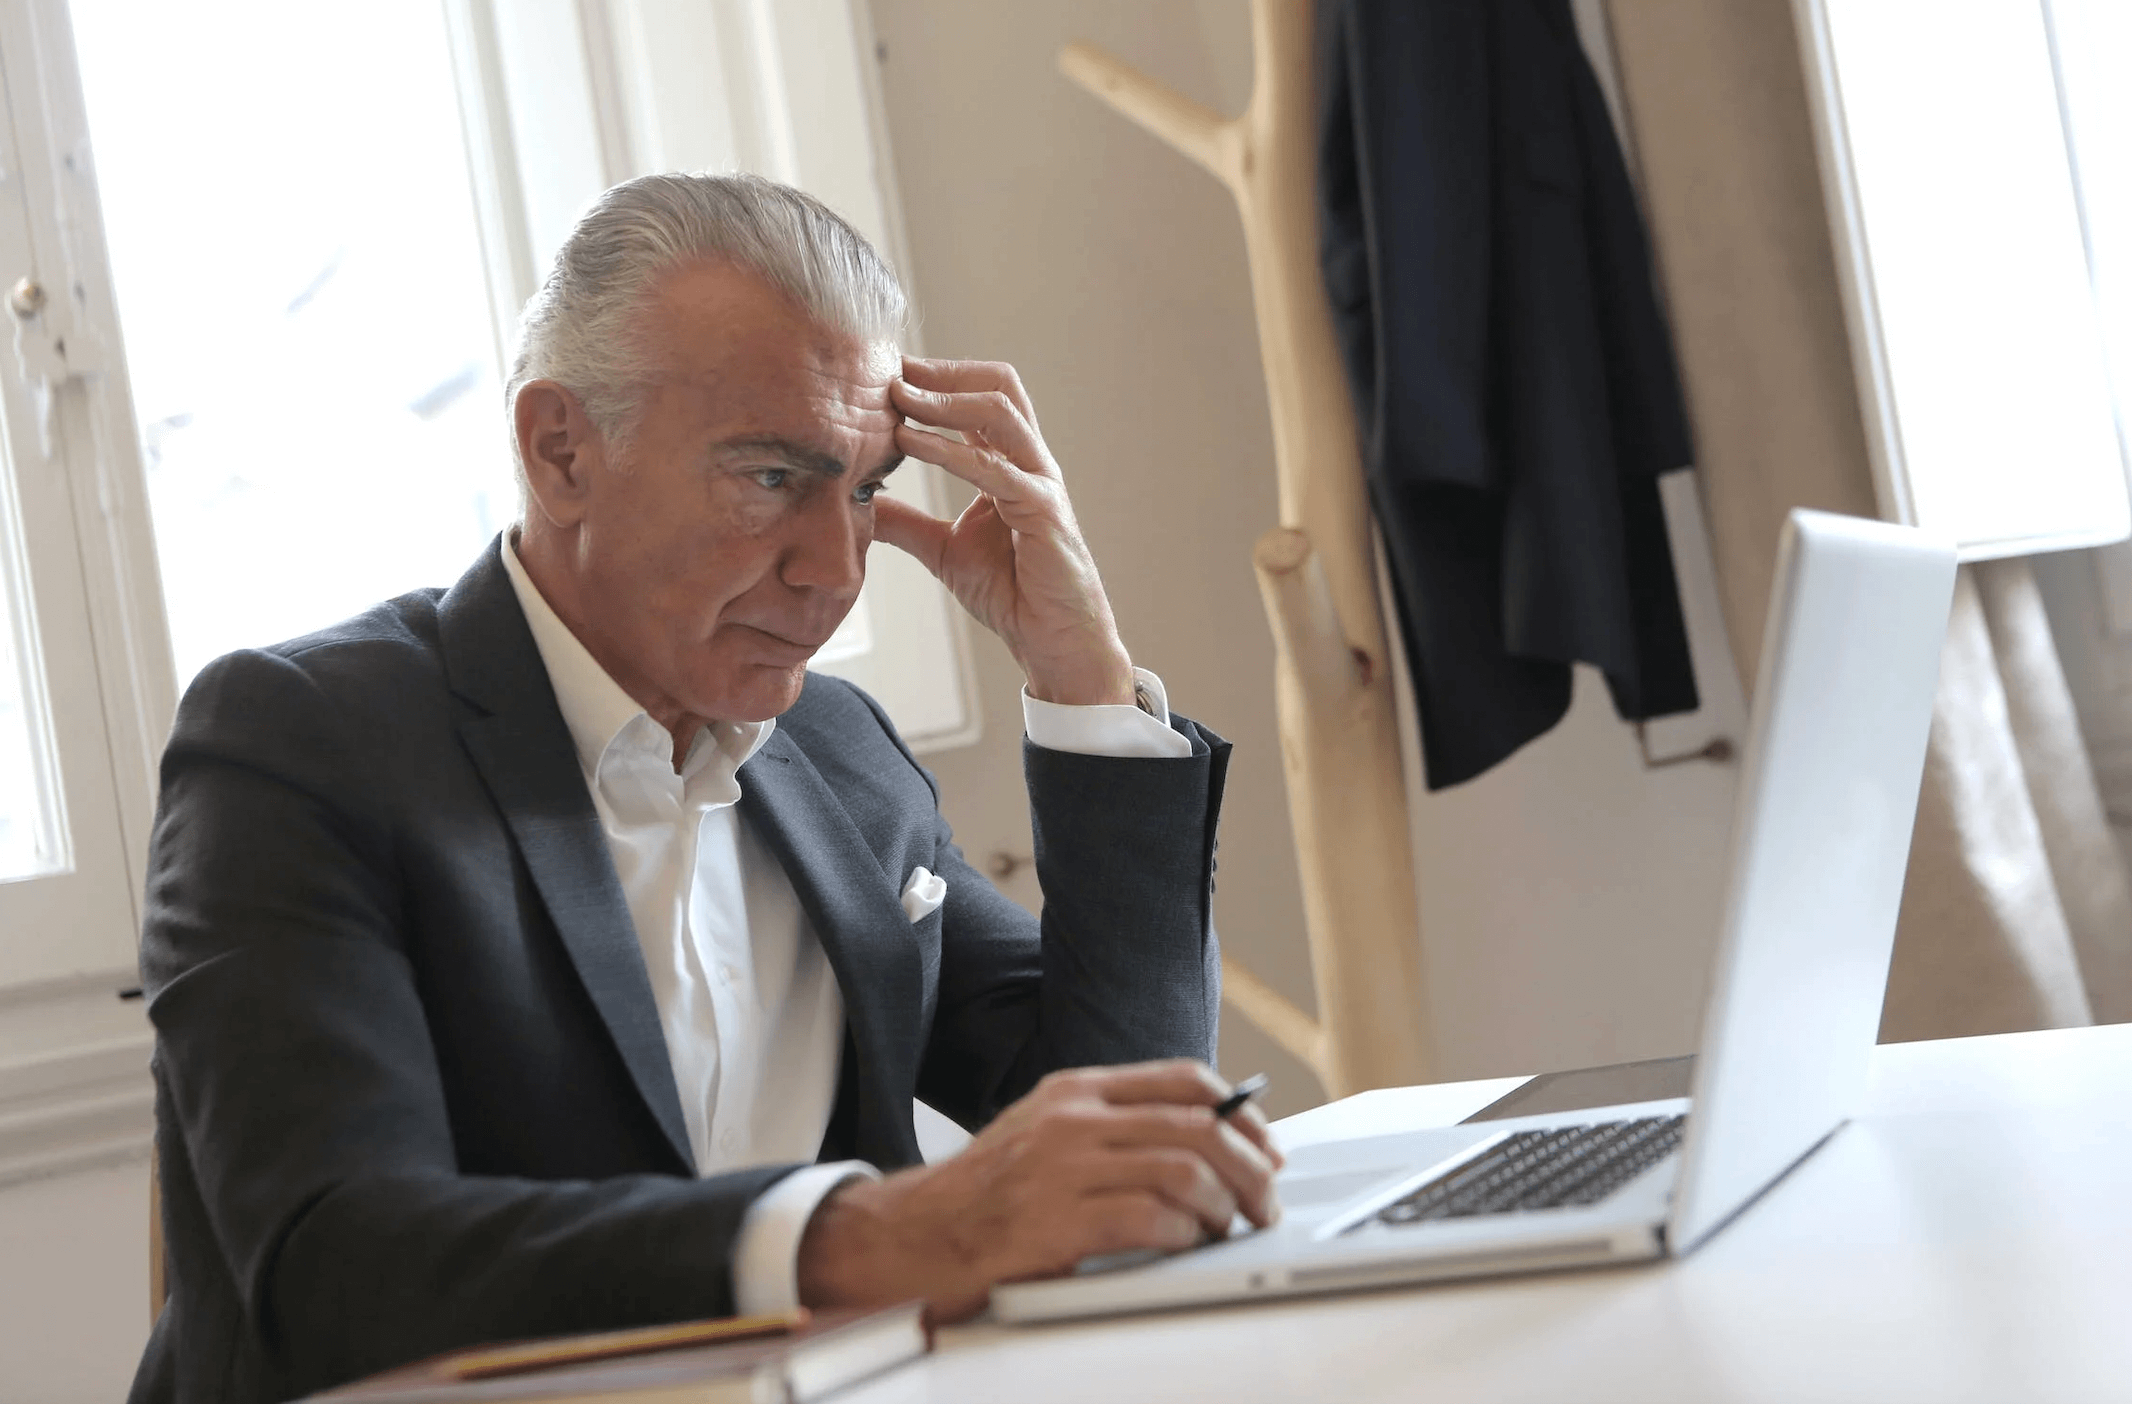 Man in a suit looking at a computer with a stressed look.